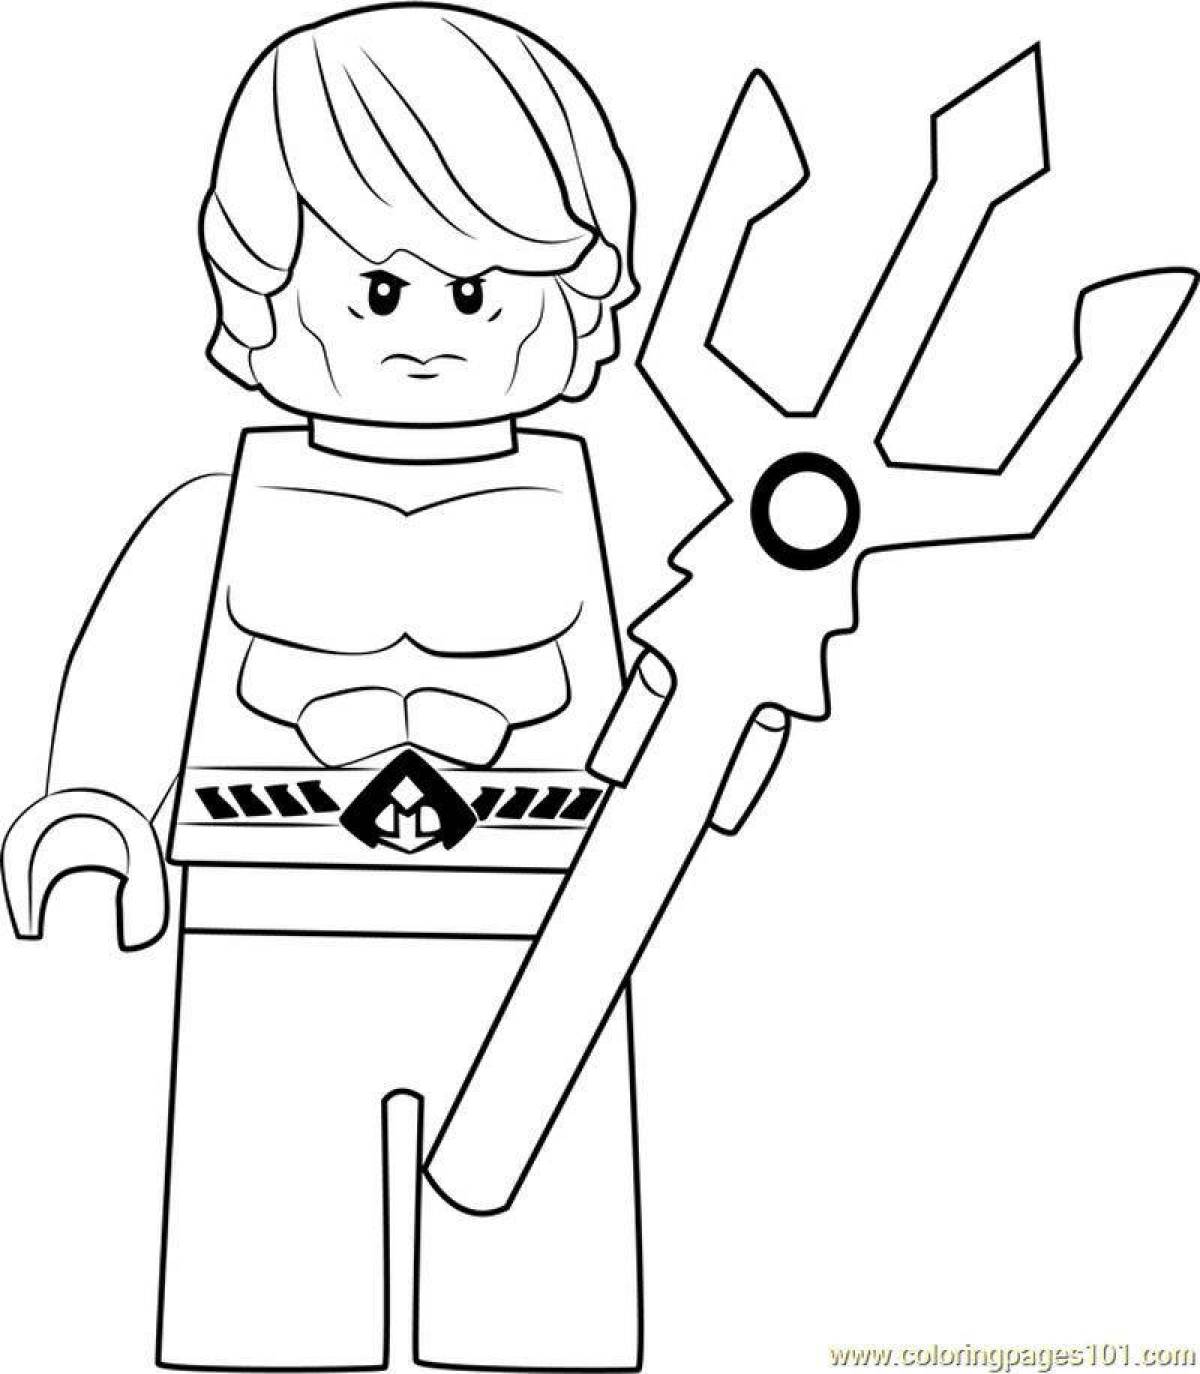 Lego men animated coloring pages